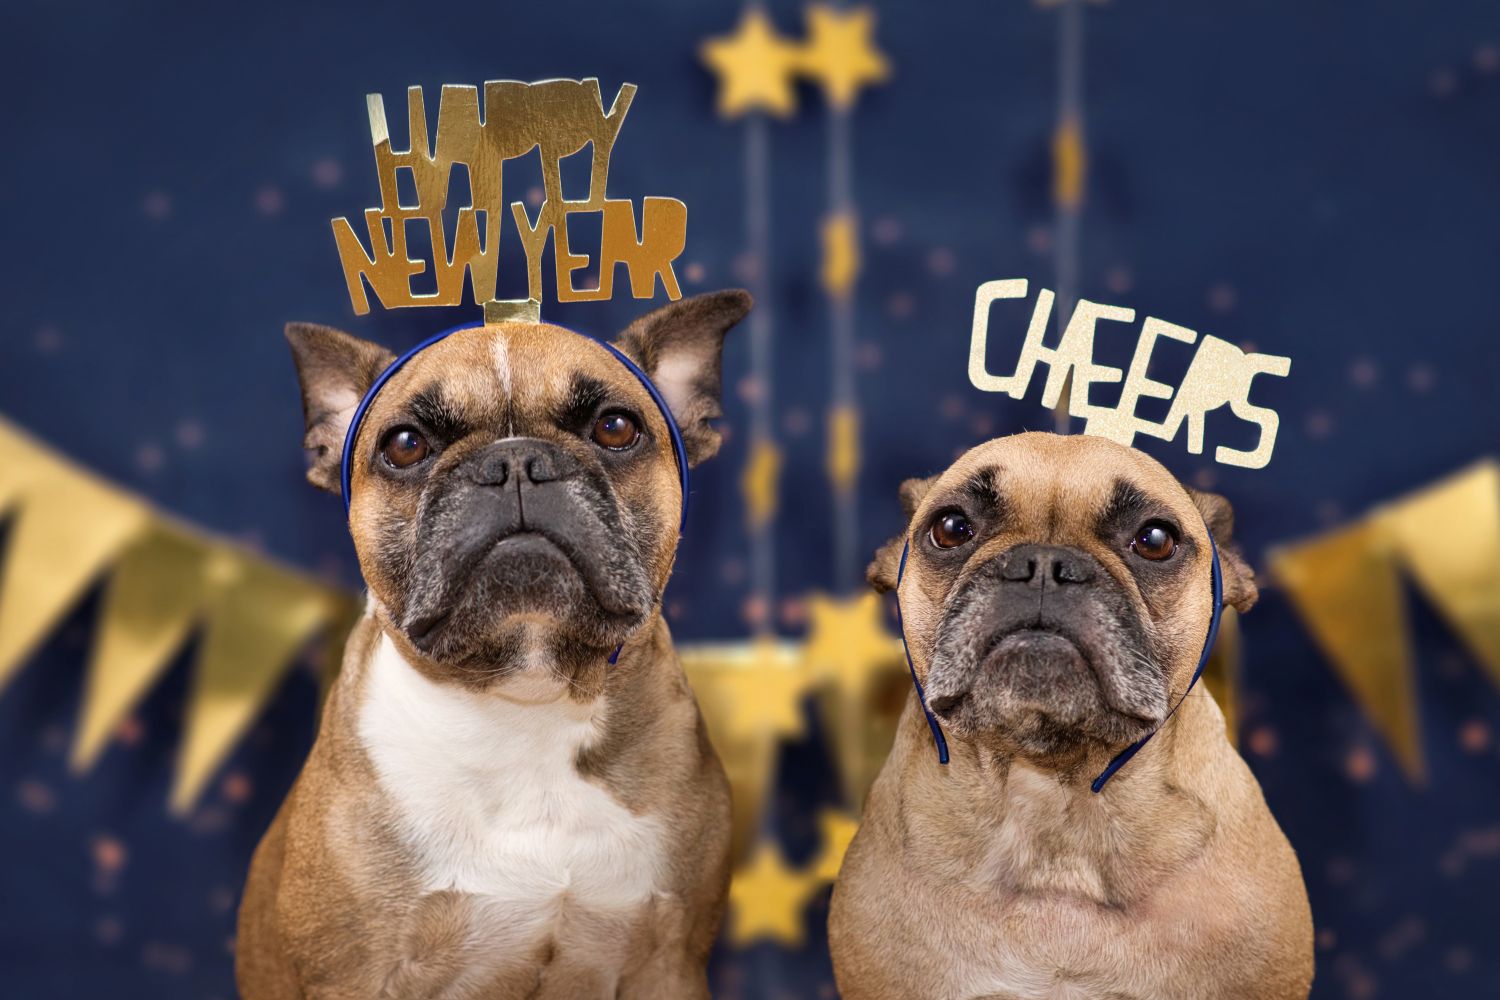 Dogs celebrating new years